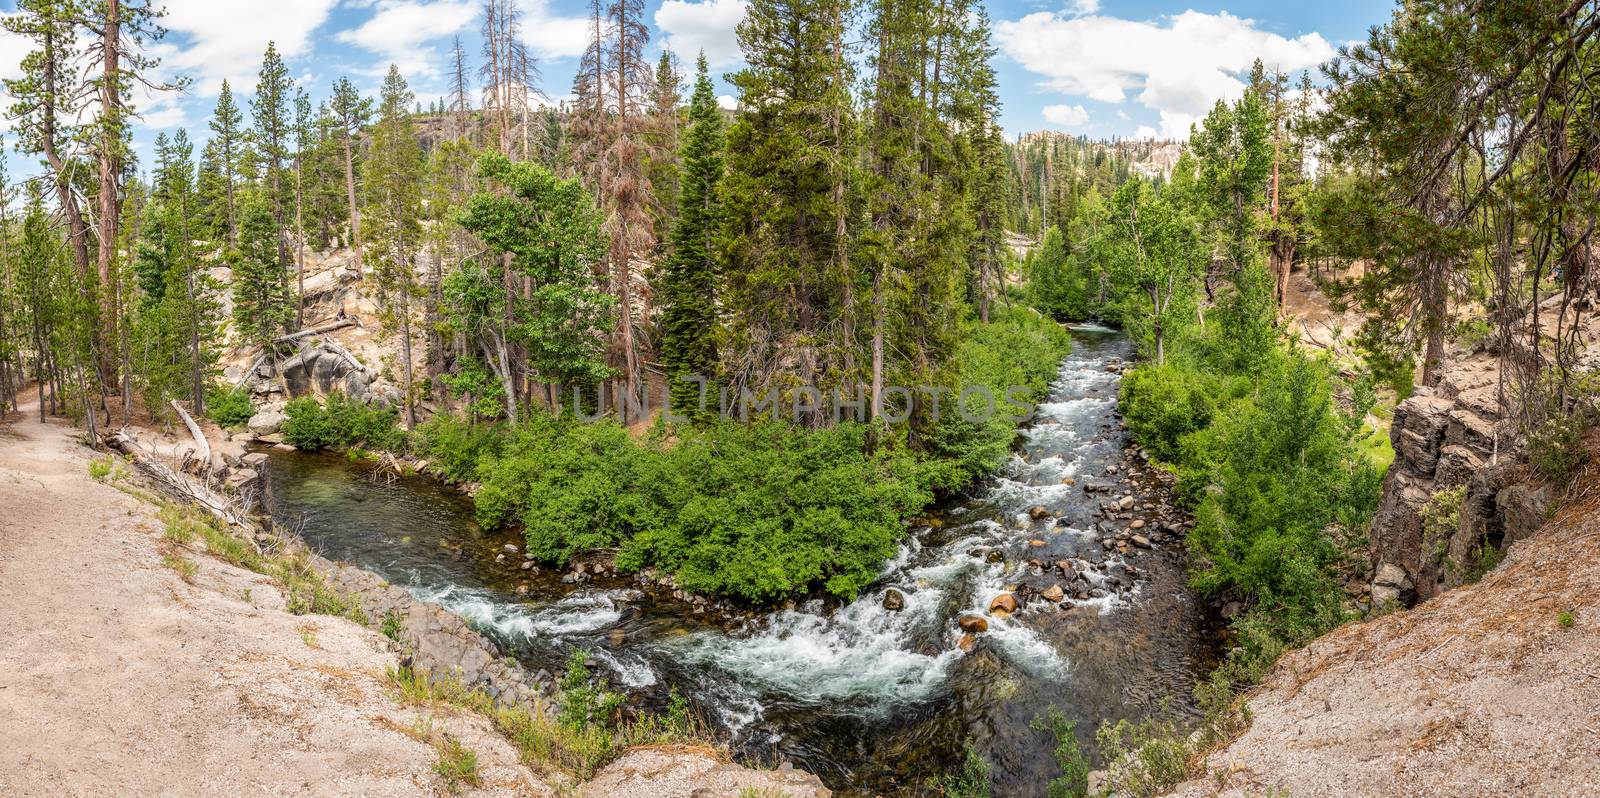 Panorama of Middle Fork San Joaquin River within Devils Postpile National Monument, Inyo National Forest, Ansel Adams Wilderness by Njean